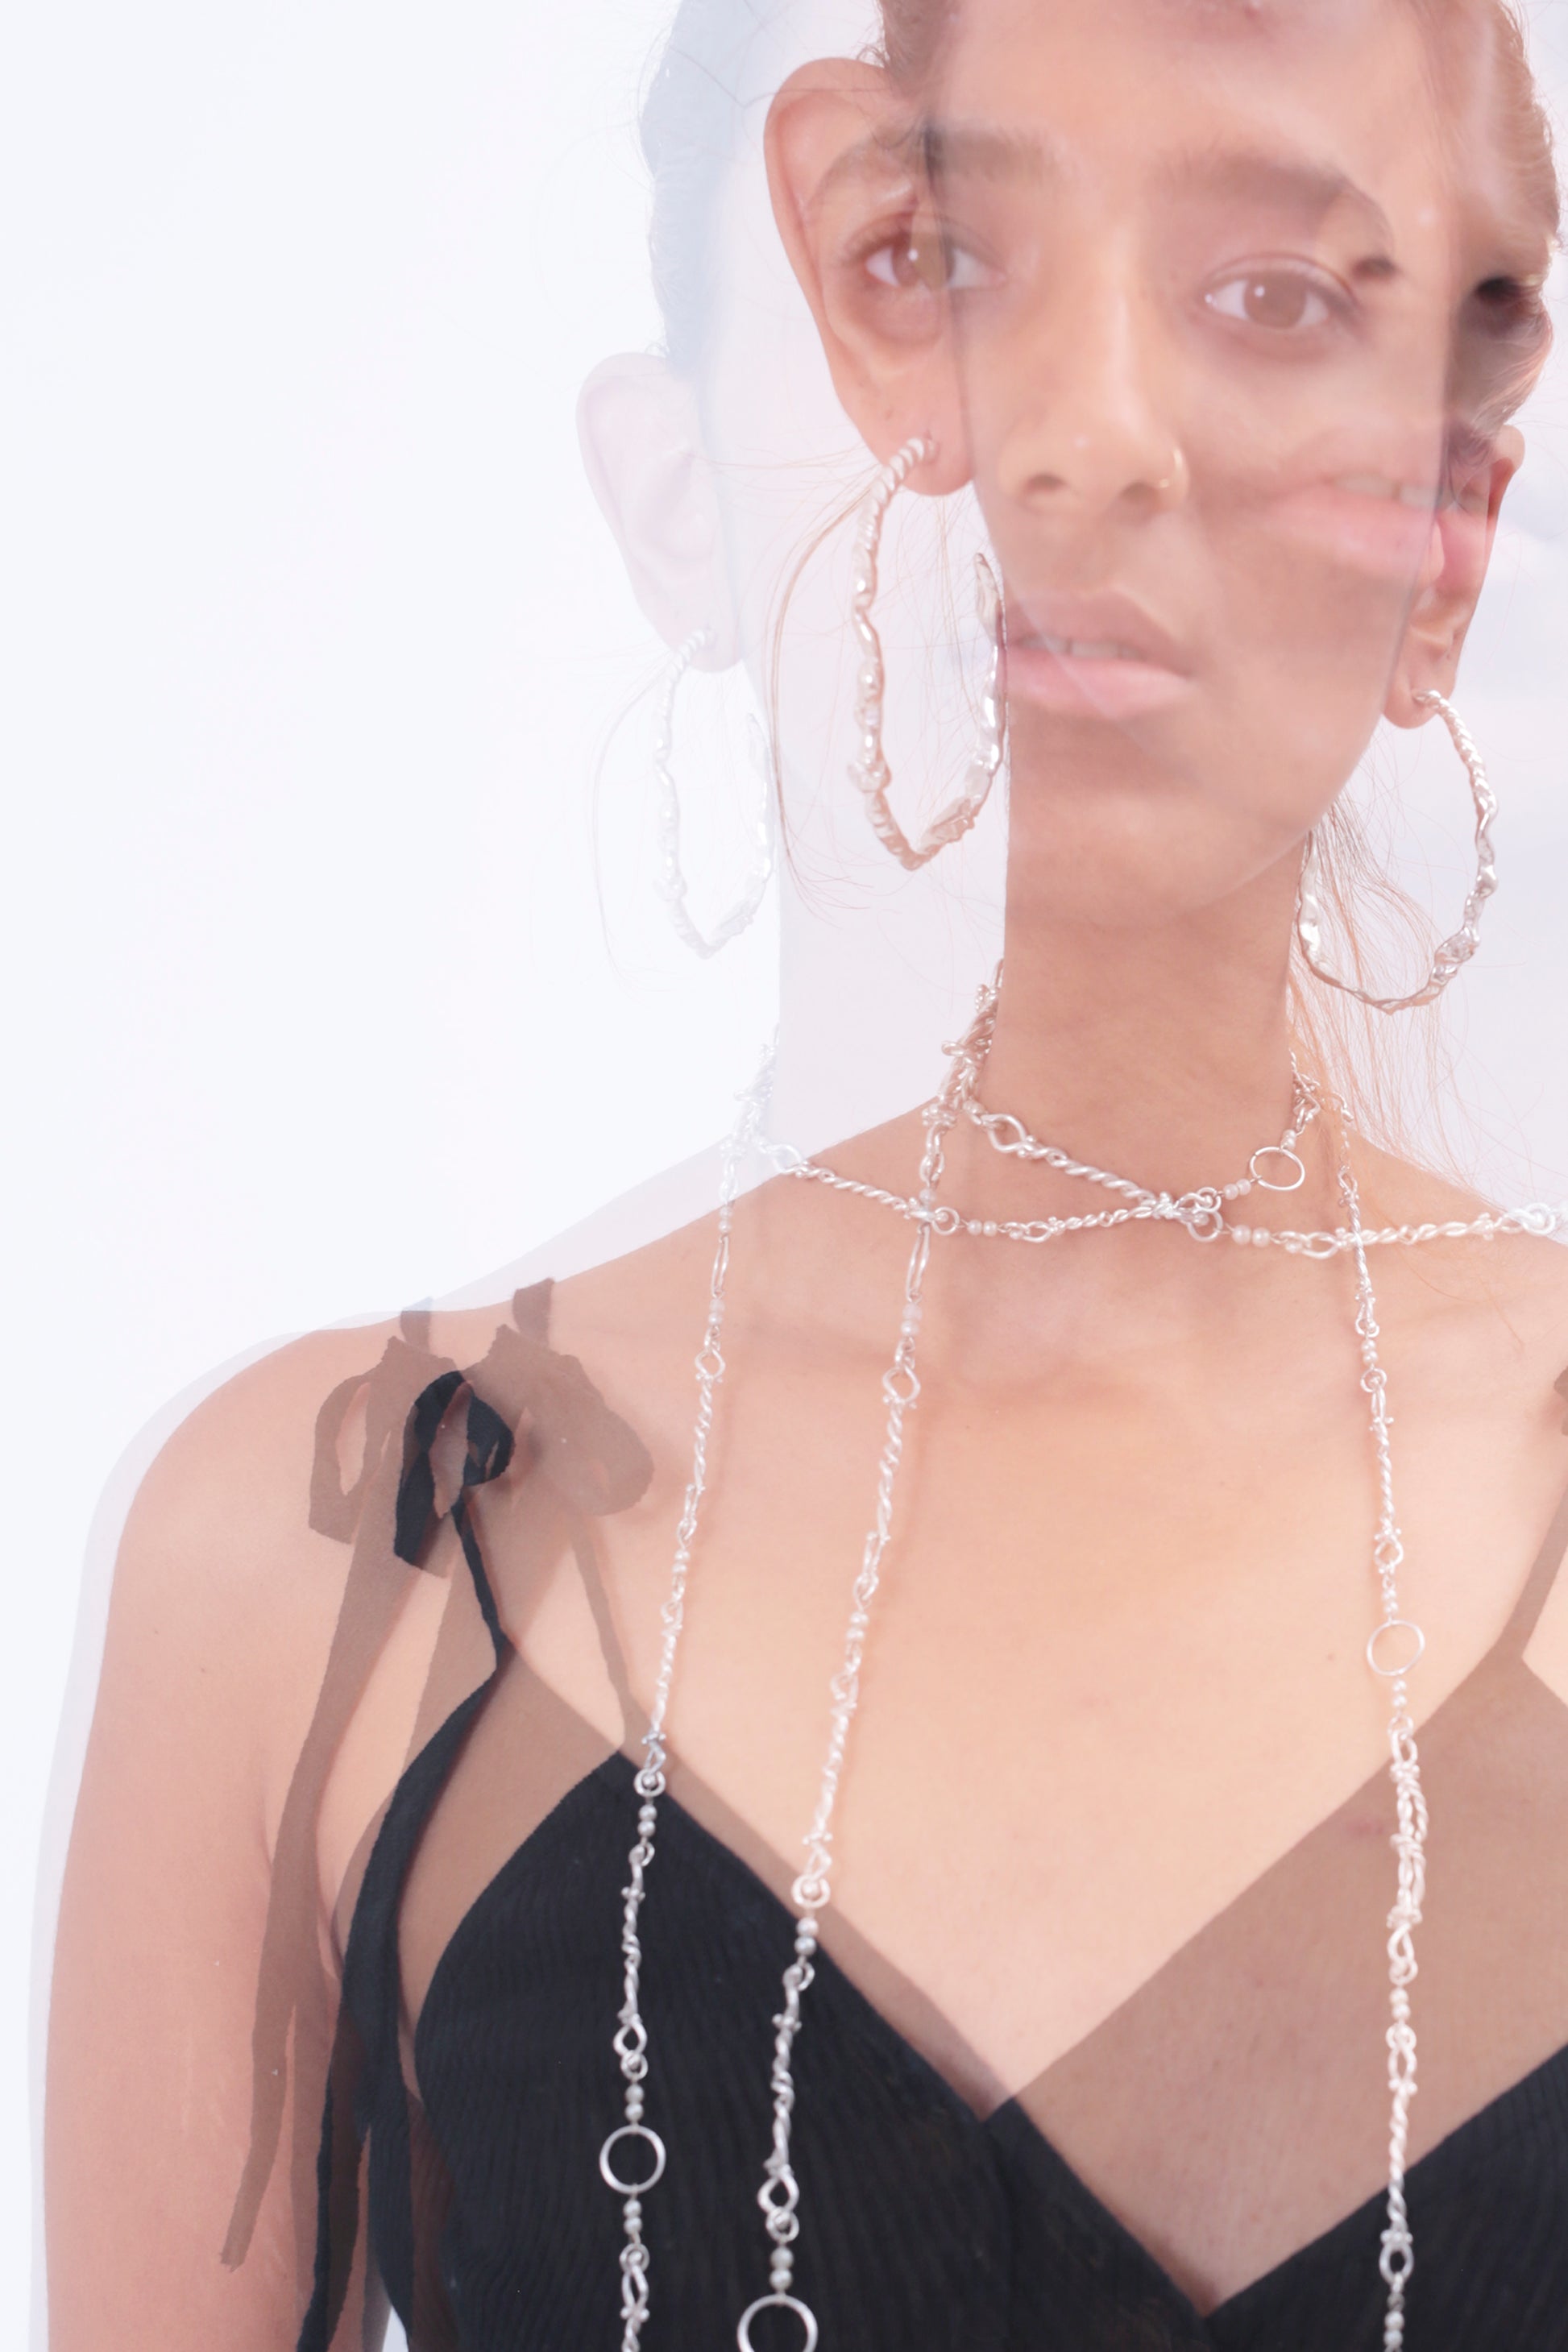 Double exposure mood photos of model, Aayushi Khowala, wearing CLARK Sterling Silver Sea Siren Hoop earrings. The mood is elevated and elegant as well featuring Renaissance inspired jewelry. 